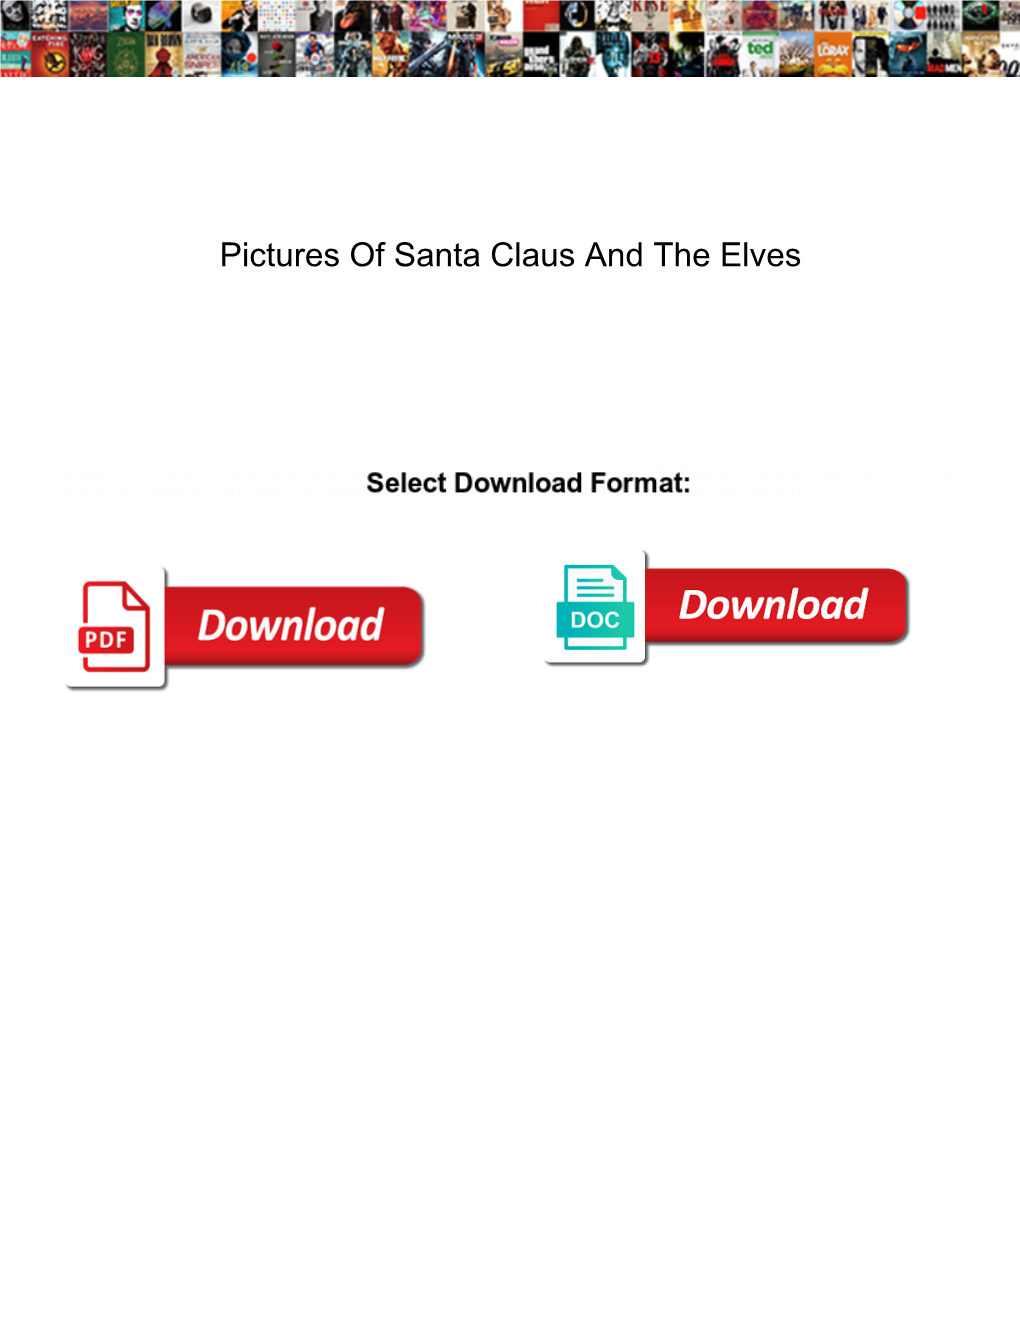 Pictures of Santa Claus and the Elves